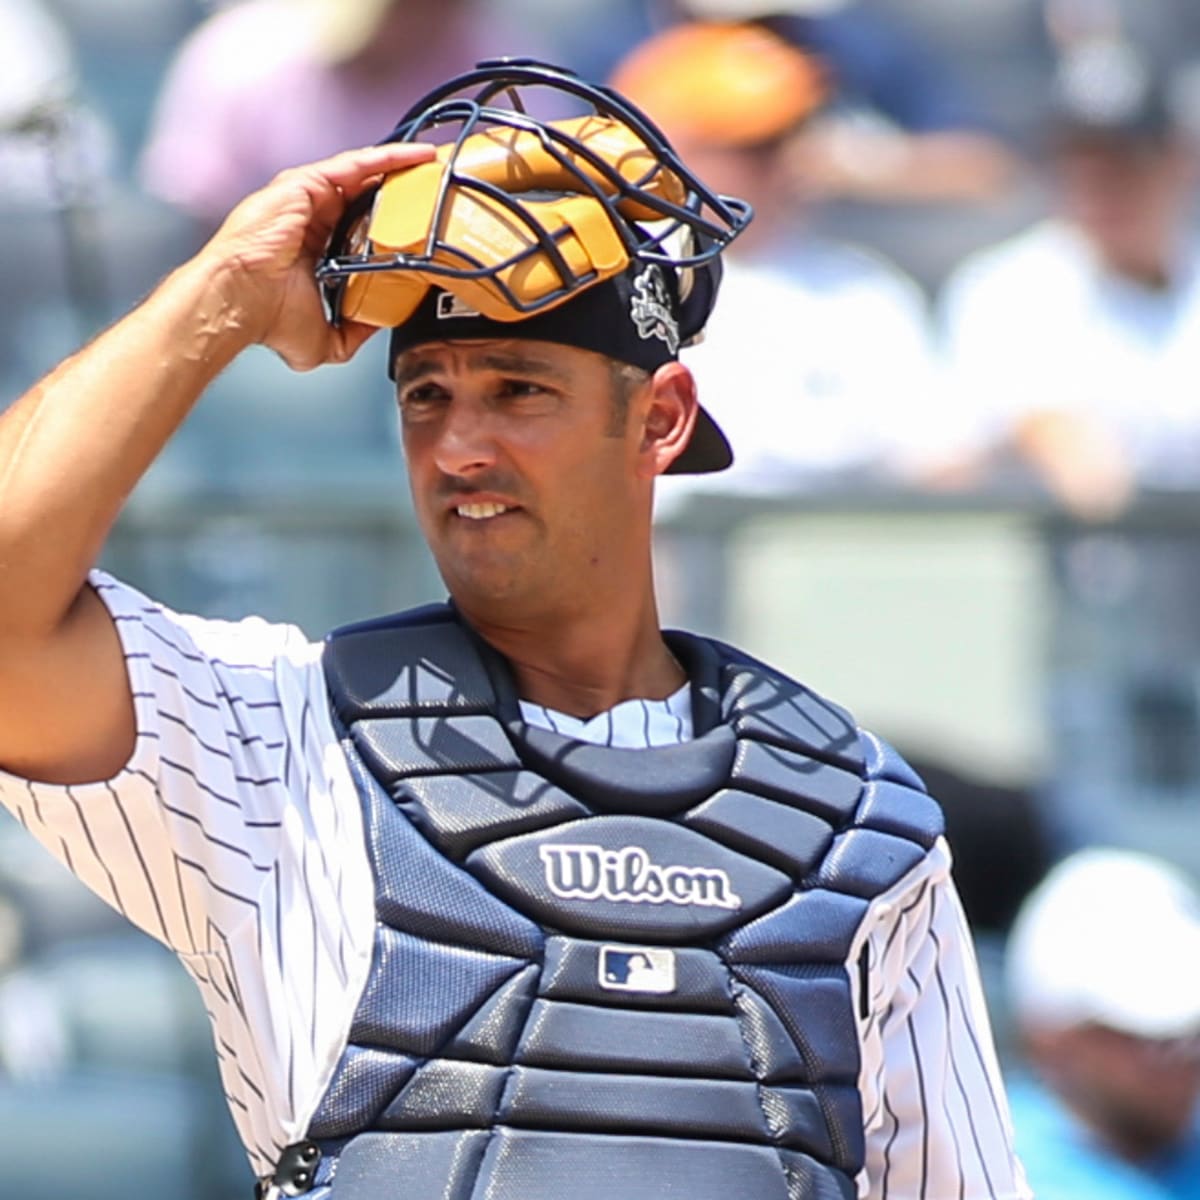 Jorge Posada Completed New York Yankees Core 4 - Pro Sports Outlook